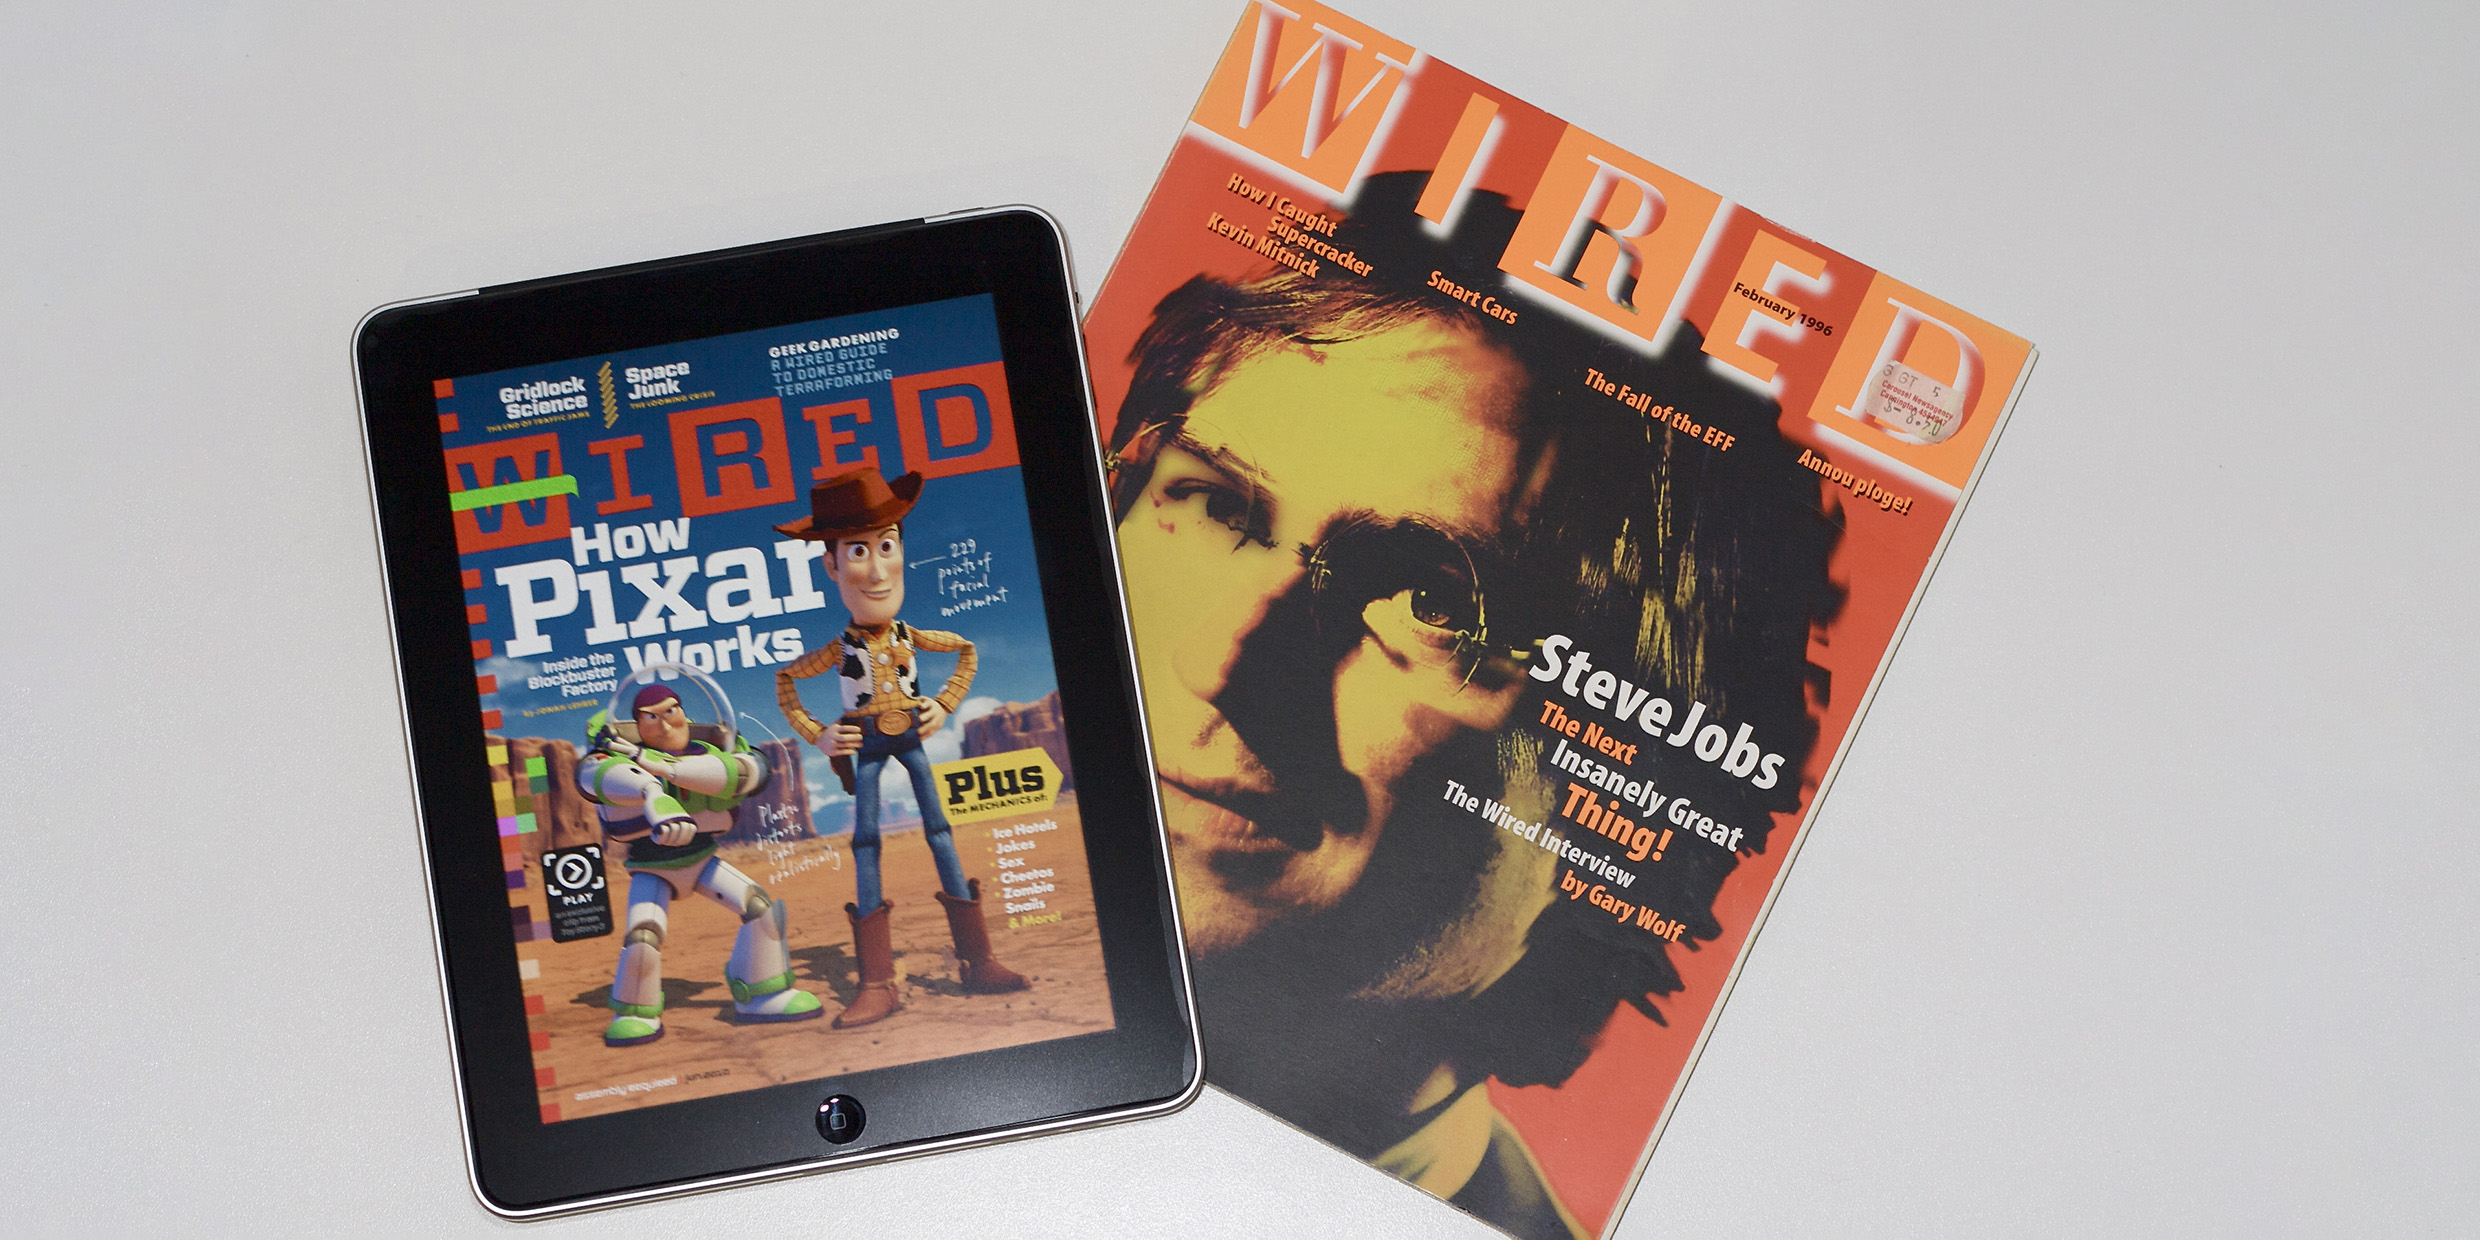 Image of the digital edition of Wired magazine displayed on an iPad next to a print edition of the magazine